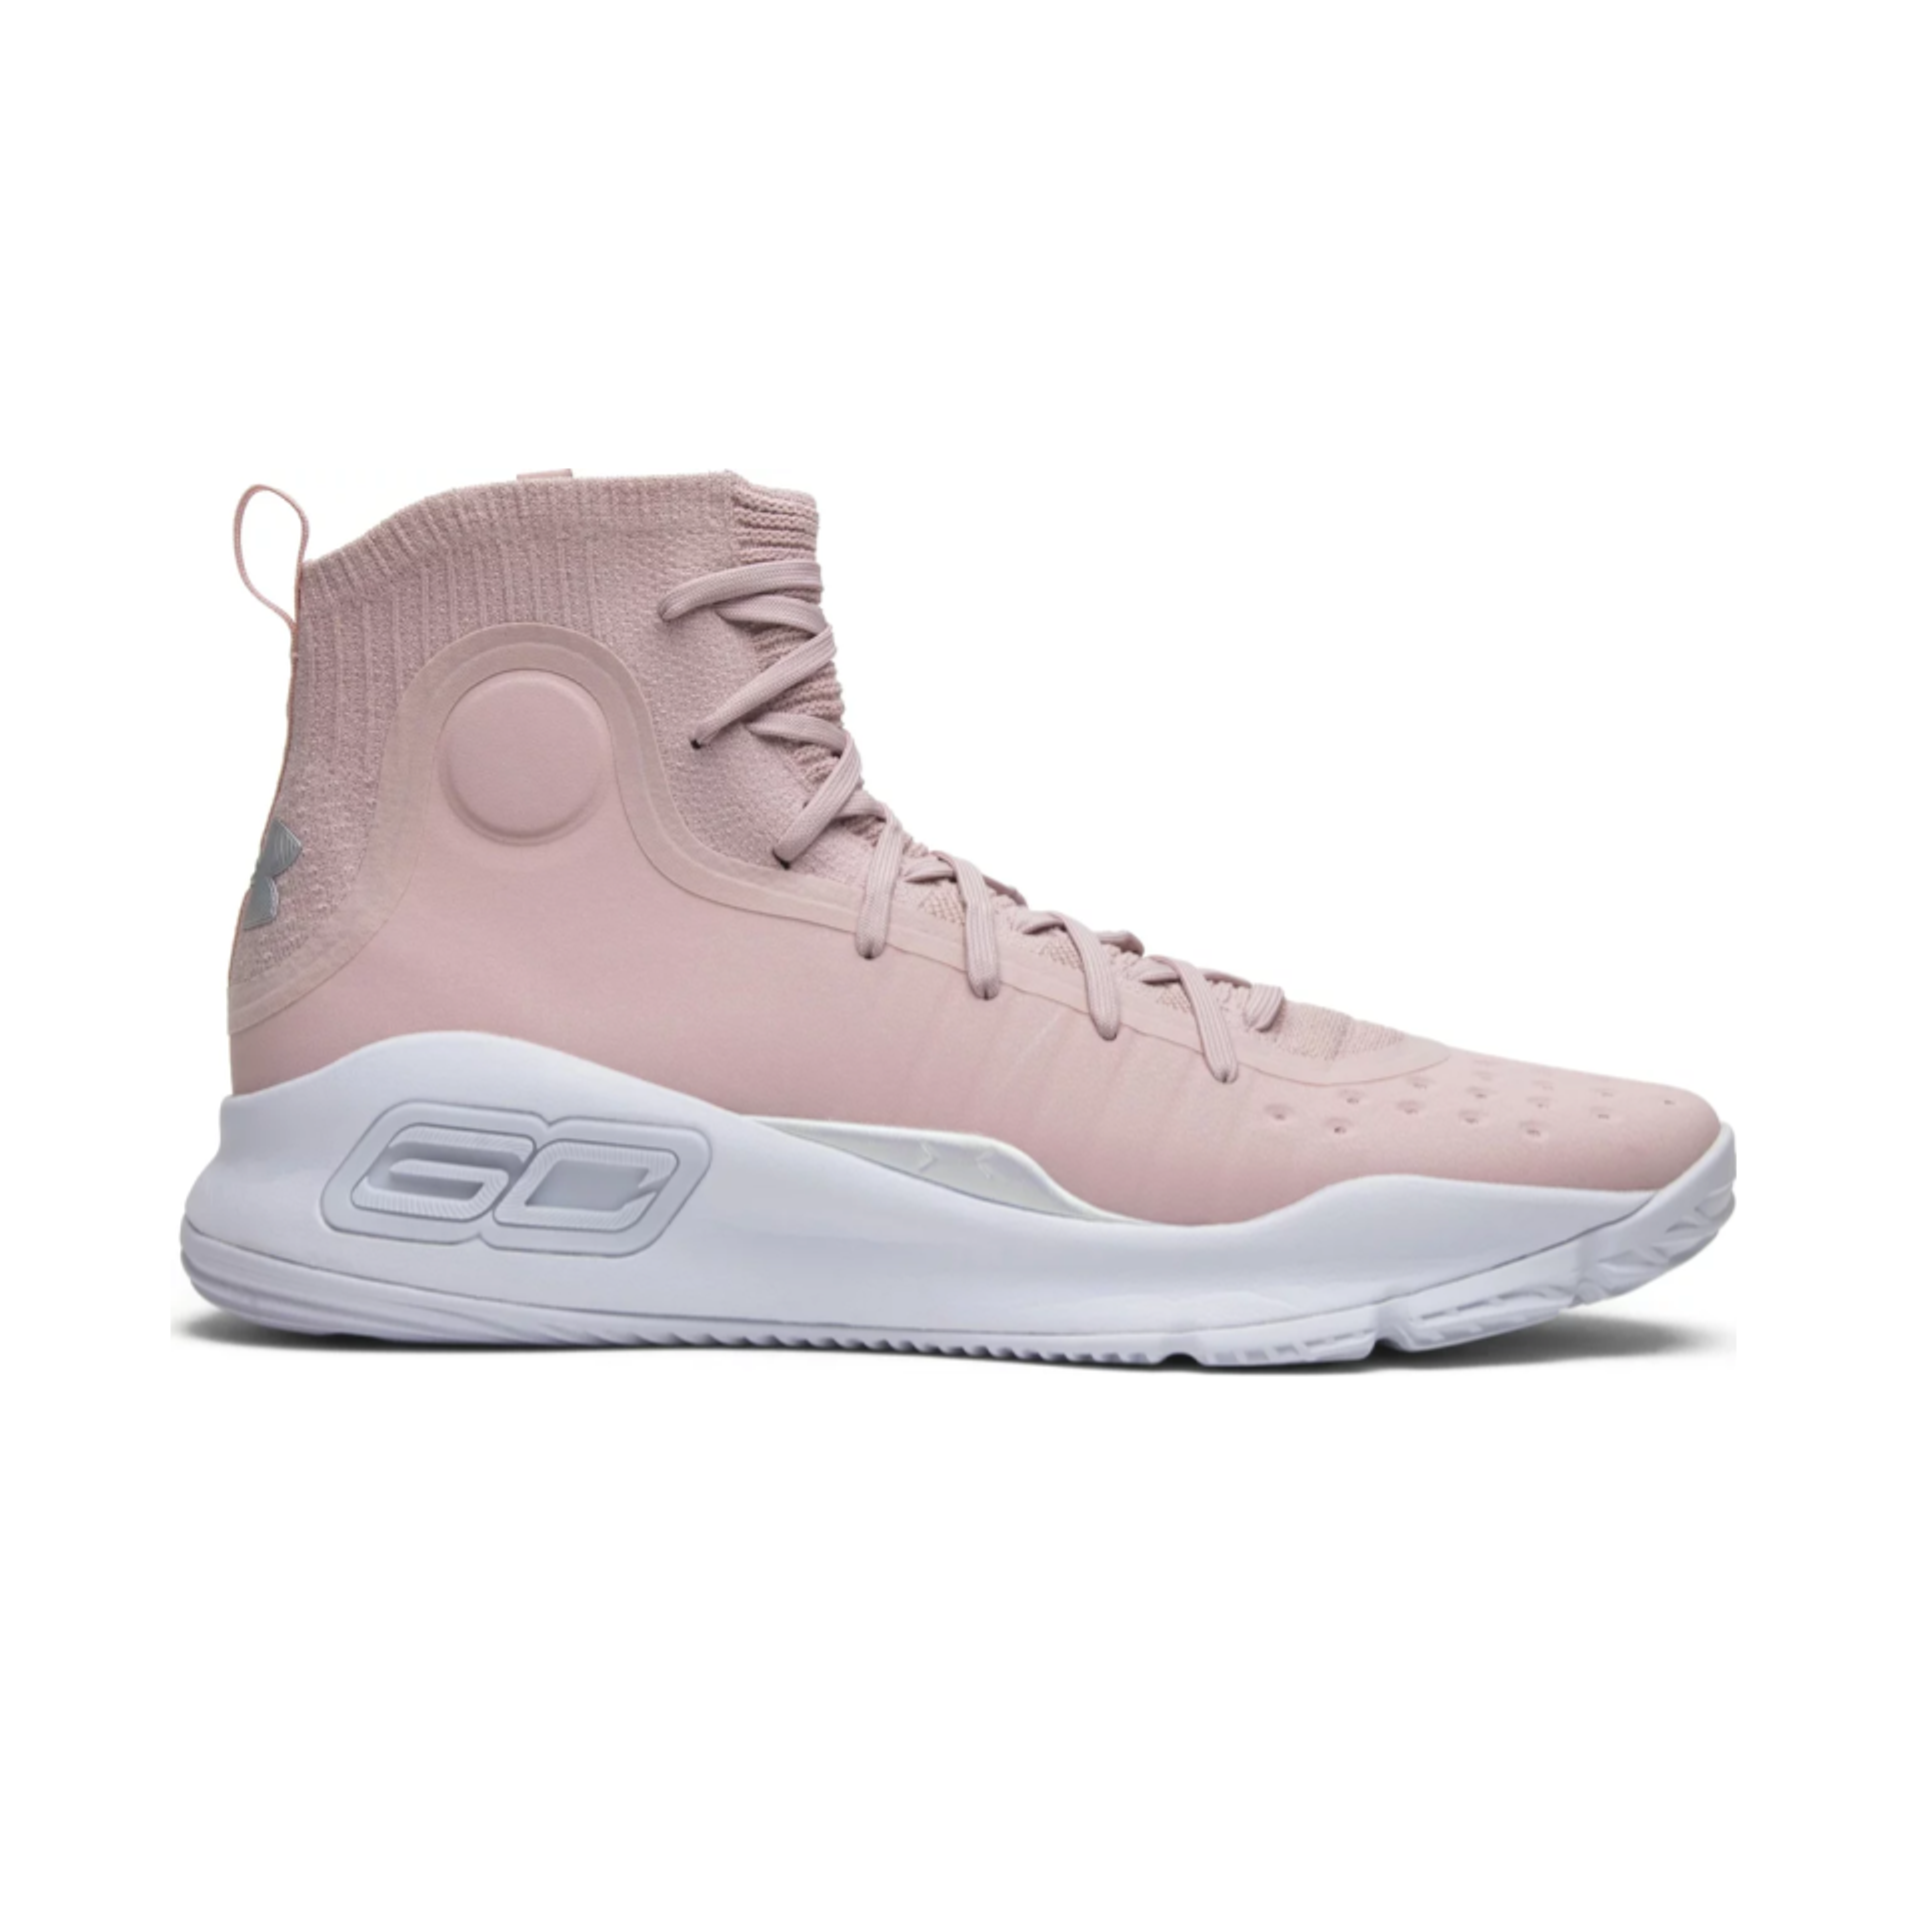 Under Armour Curry 4 'Flushed Pink'